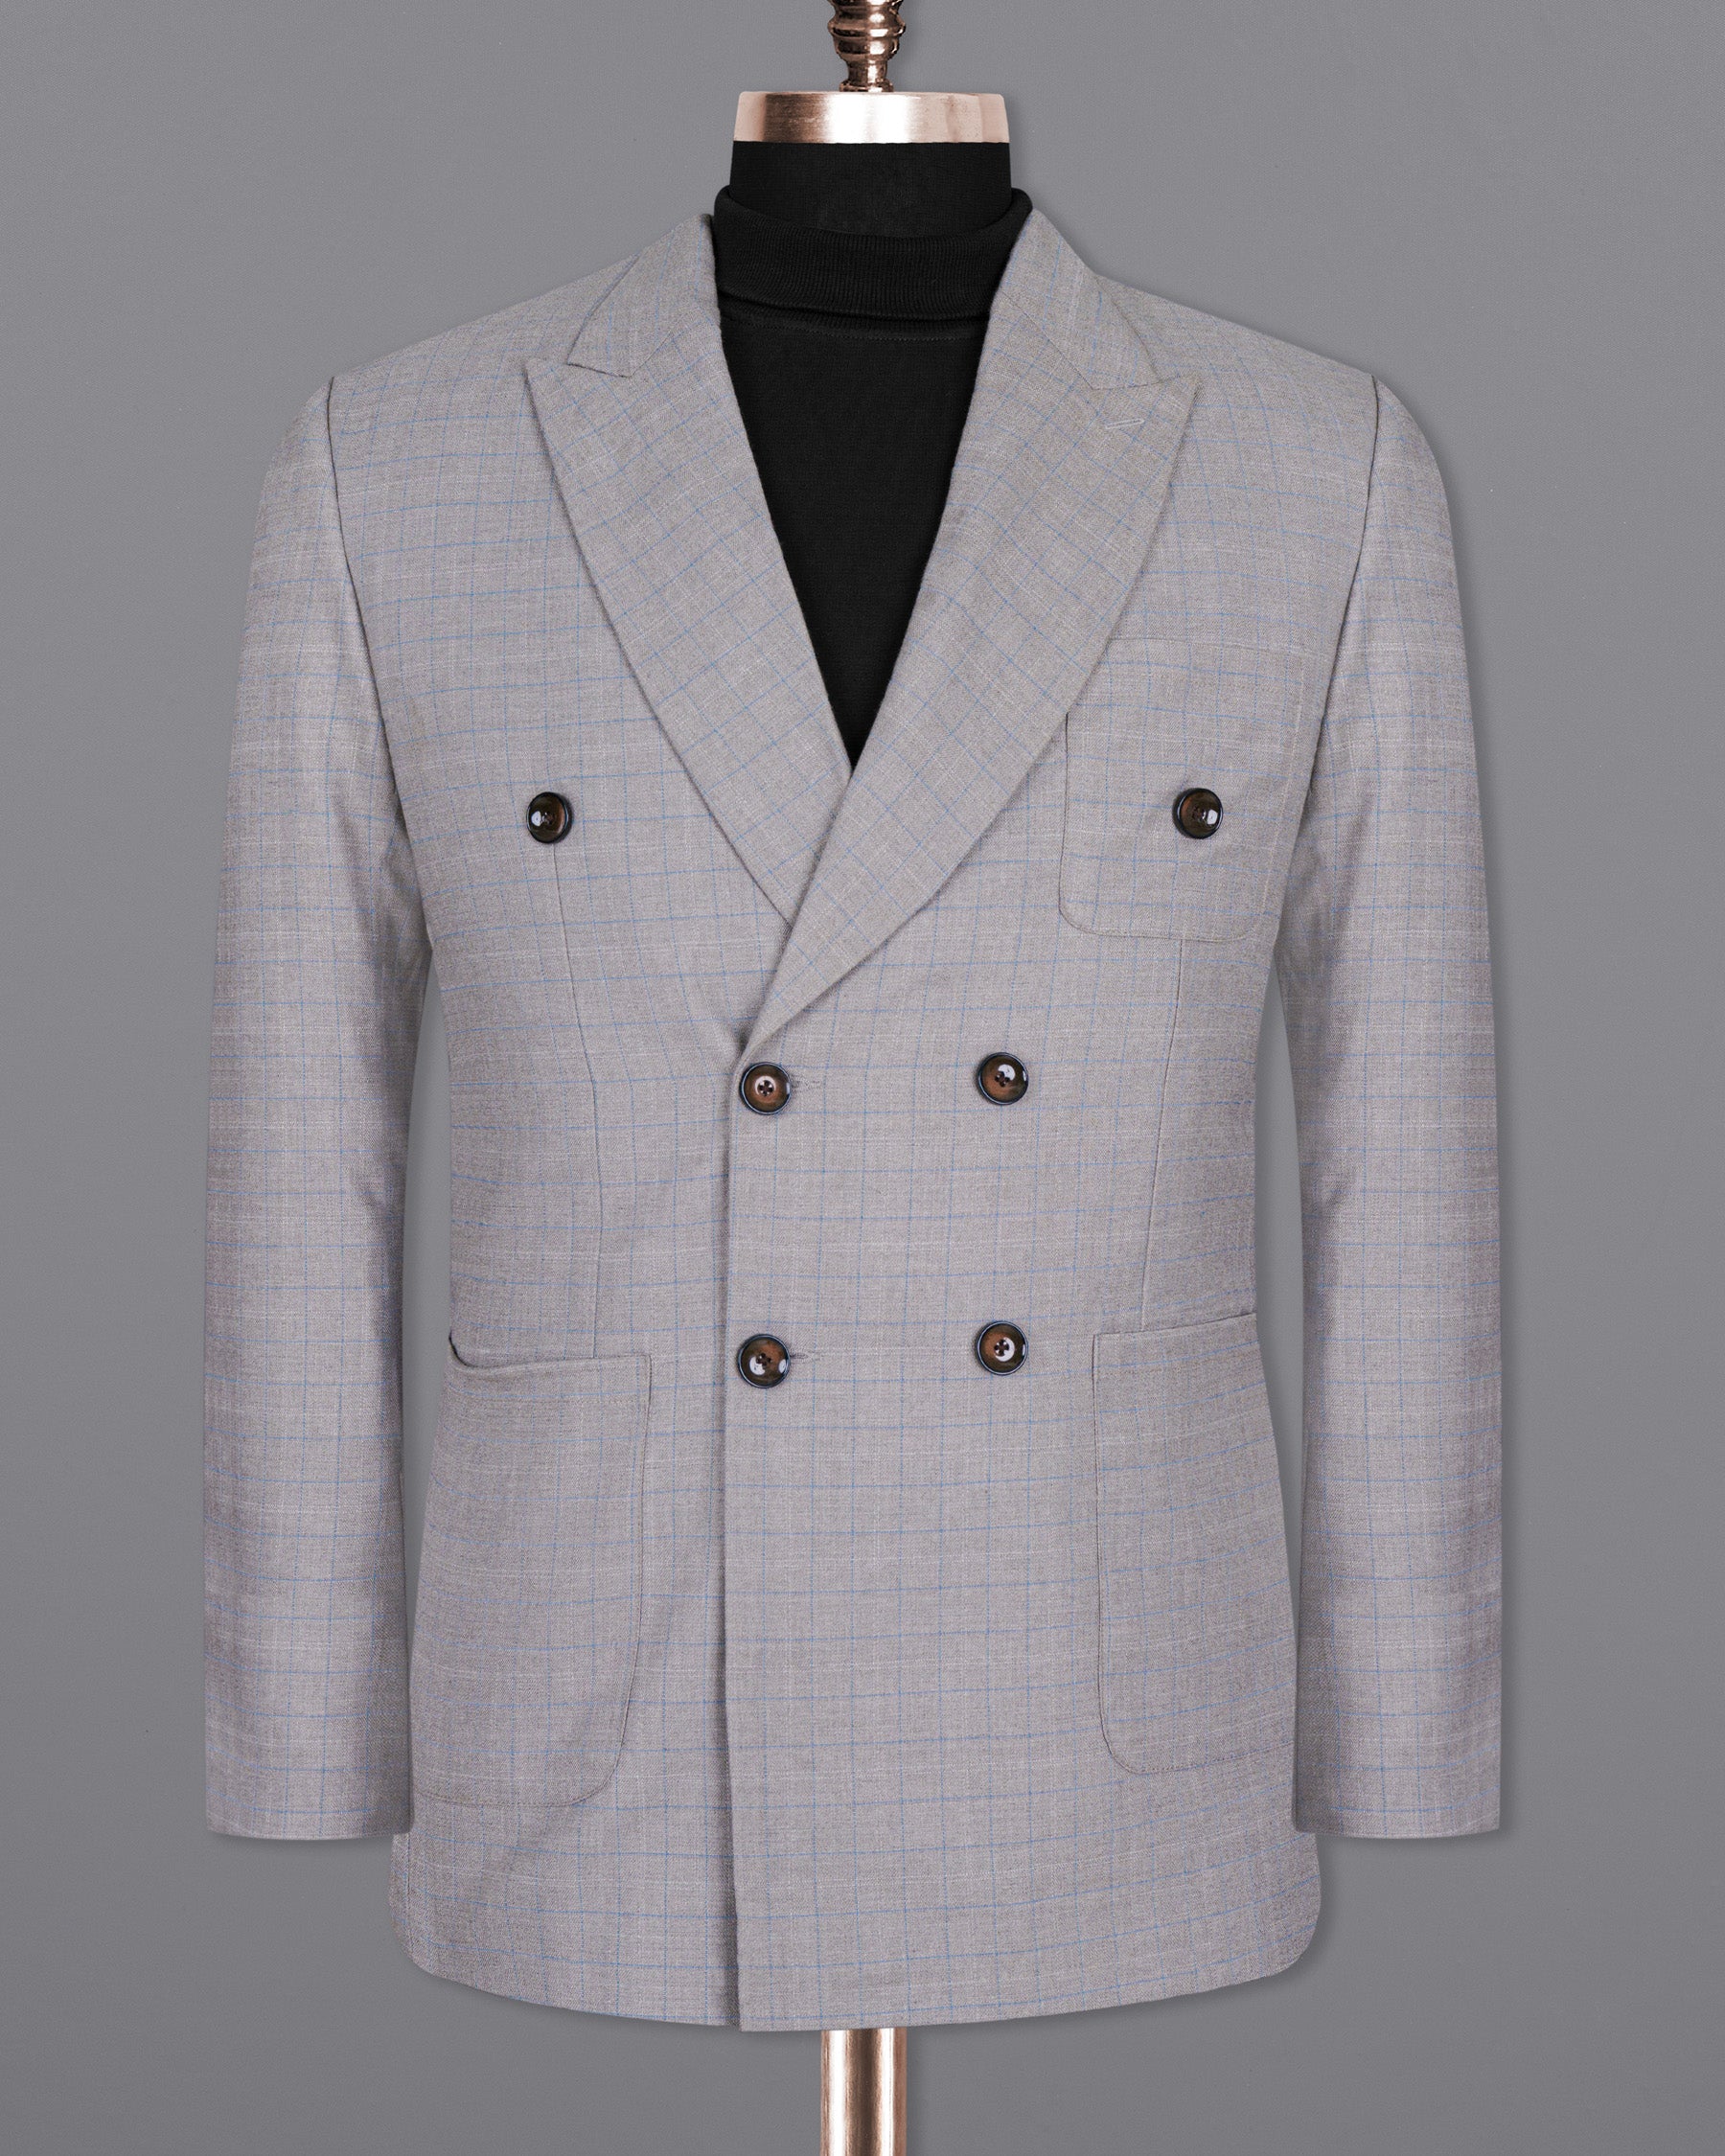 Pale Slate Plaid DouSTe-breasted Woolrich Sports Suit ST1436-DB-PP-36,ST1436-DB-PP-38,ST1436-DB-PP-40,ST1436-DB-PP-42,ST1436-DB-PP-44,ST1436-DB-PP-46,ST1436-DB-PP-48,ST1436-DB-PP-50,ST1436-DB-PP-52,ST1436-DB-PP-54,ST1436-DB-PP-56,ST1436-DB-PP-58,ST1436-DB-PP-60